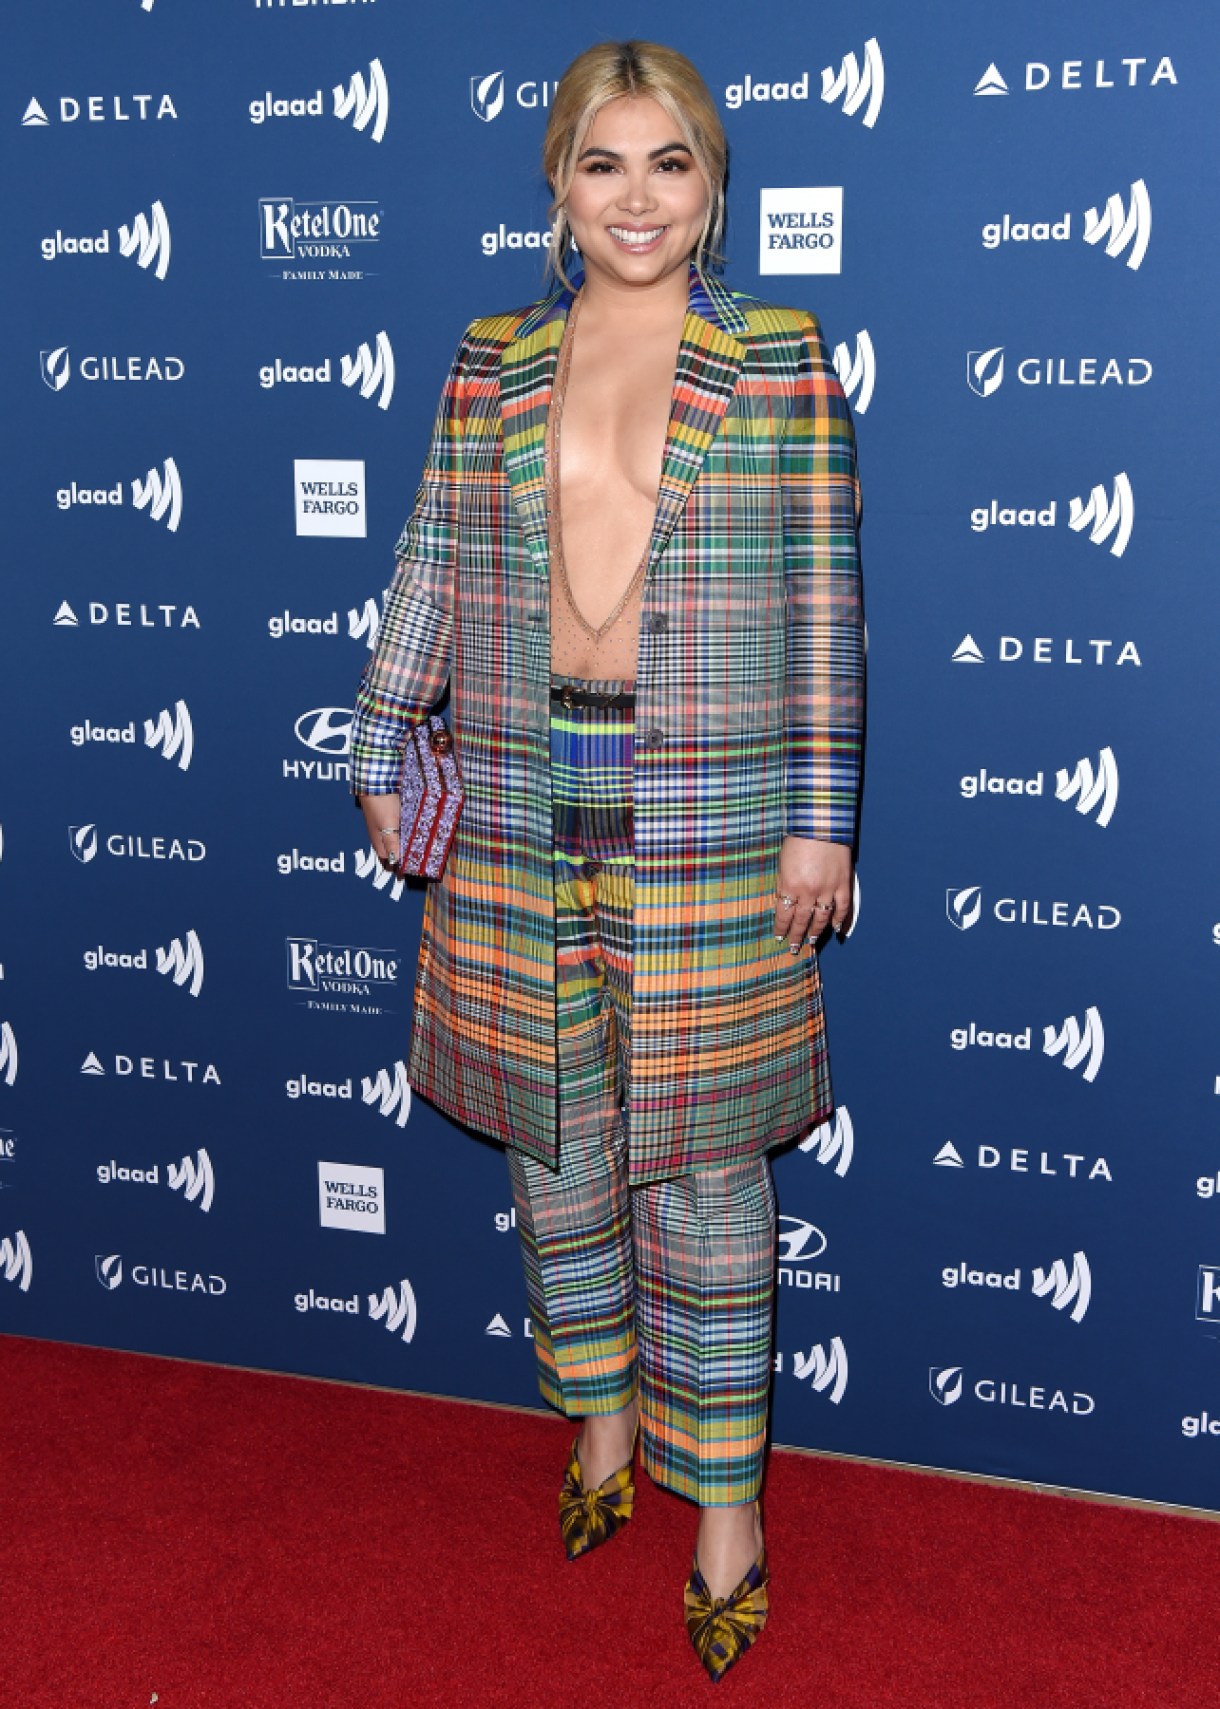 BEVERLY HILLS, CALIFORNIA - MARCH 28: Hayley Kiyoko attends the 30th Annual GLAAD Media Awards at The Beverly Hilton Hotel on March 28, 2019 in Beverly Hills, California. (Photo by Axelle/Bauer-Griffin/FilmMagic)